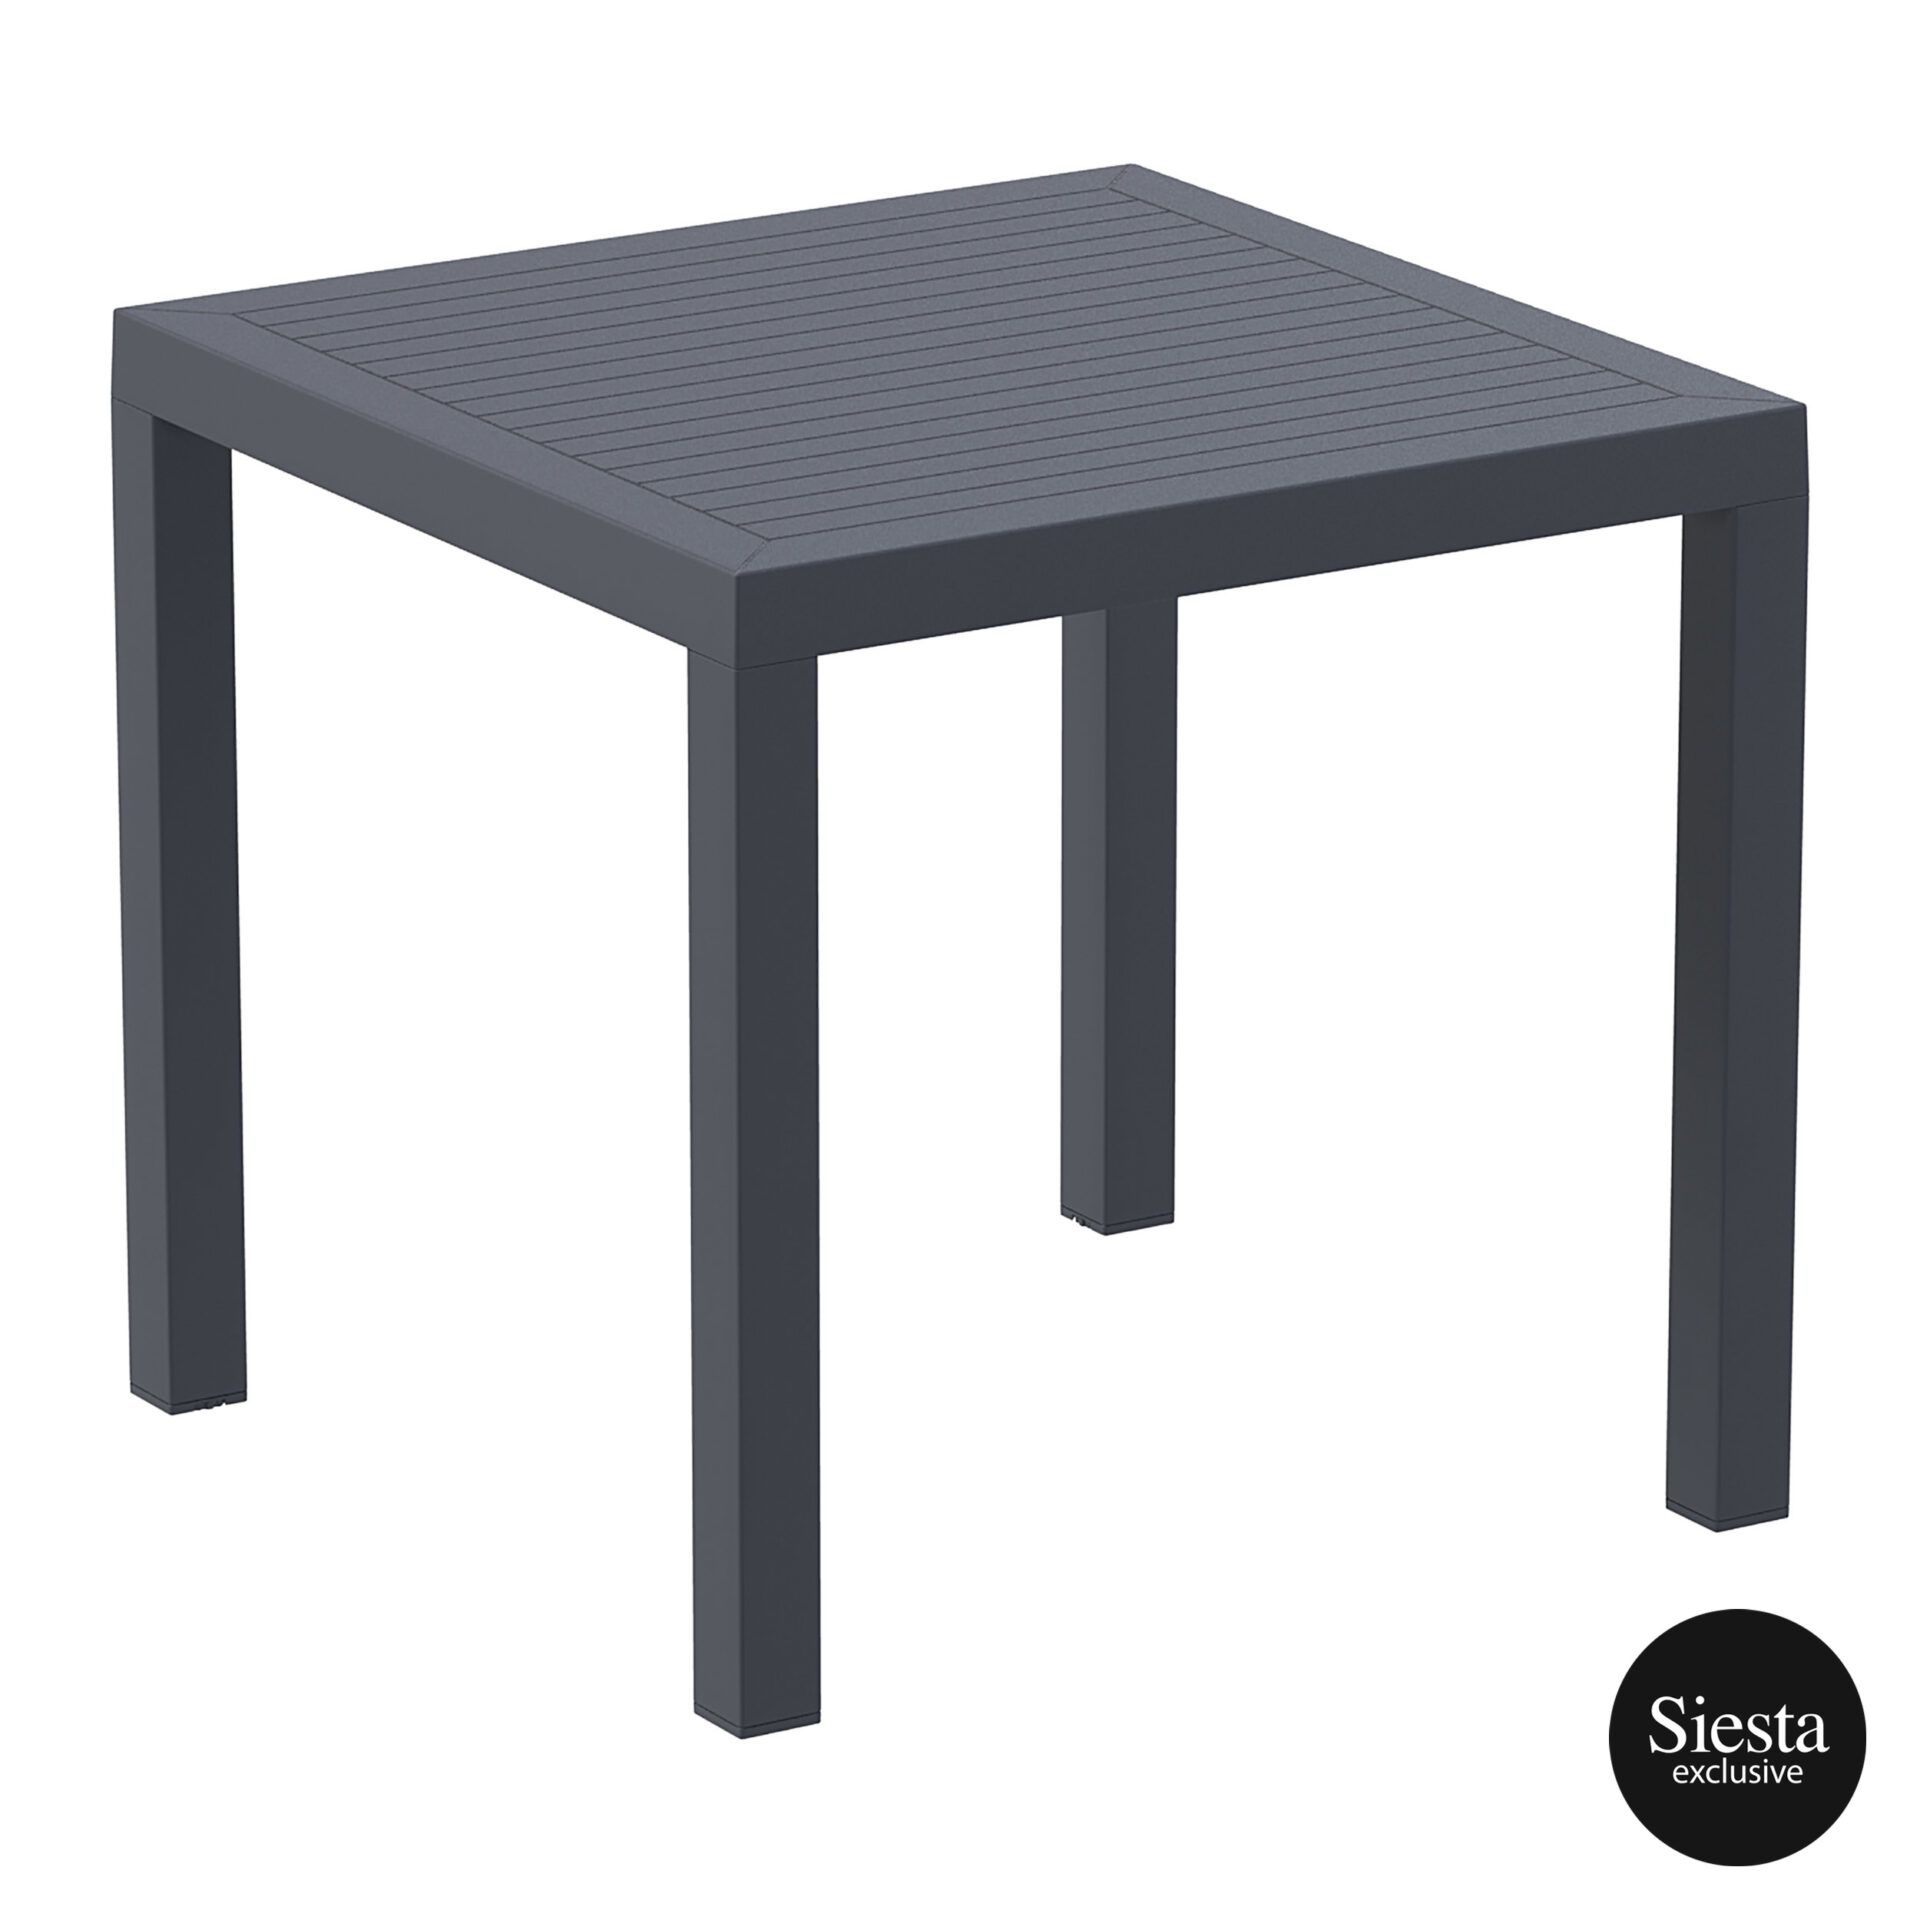 Ares 80 Table - Anthracite